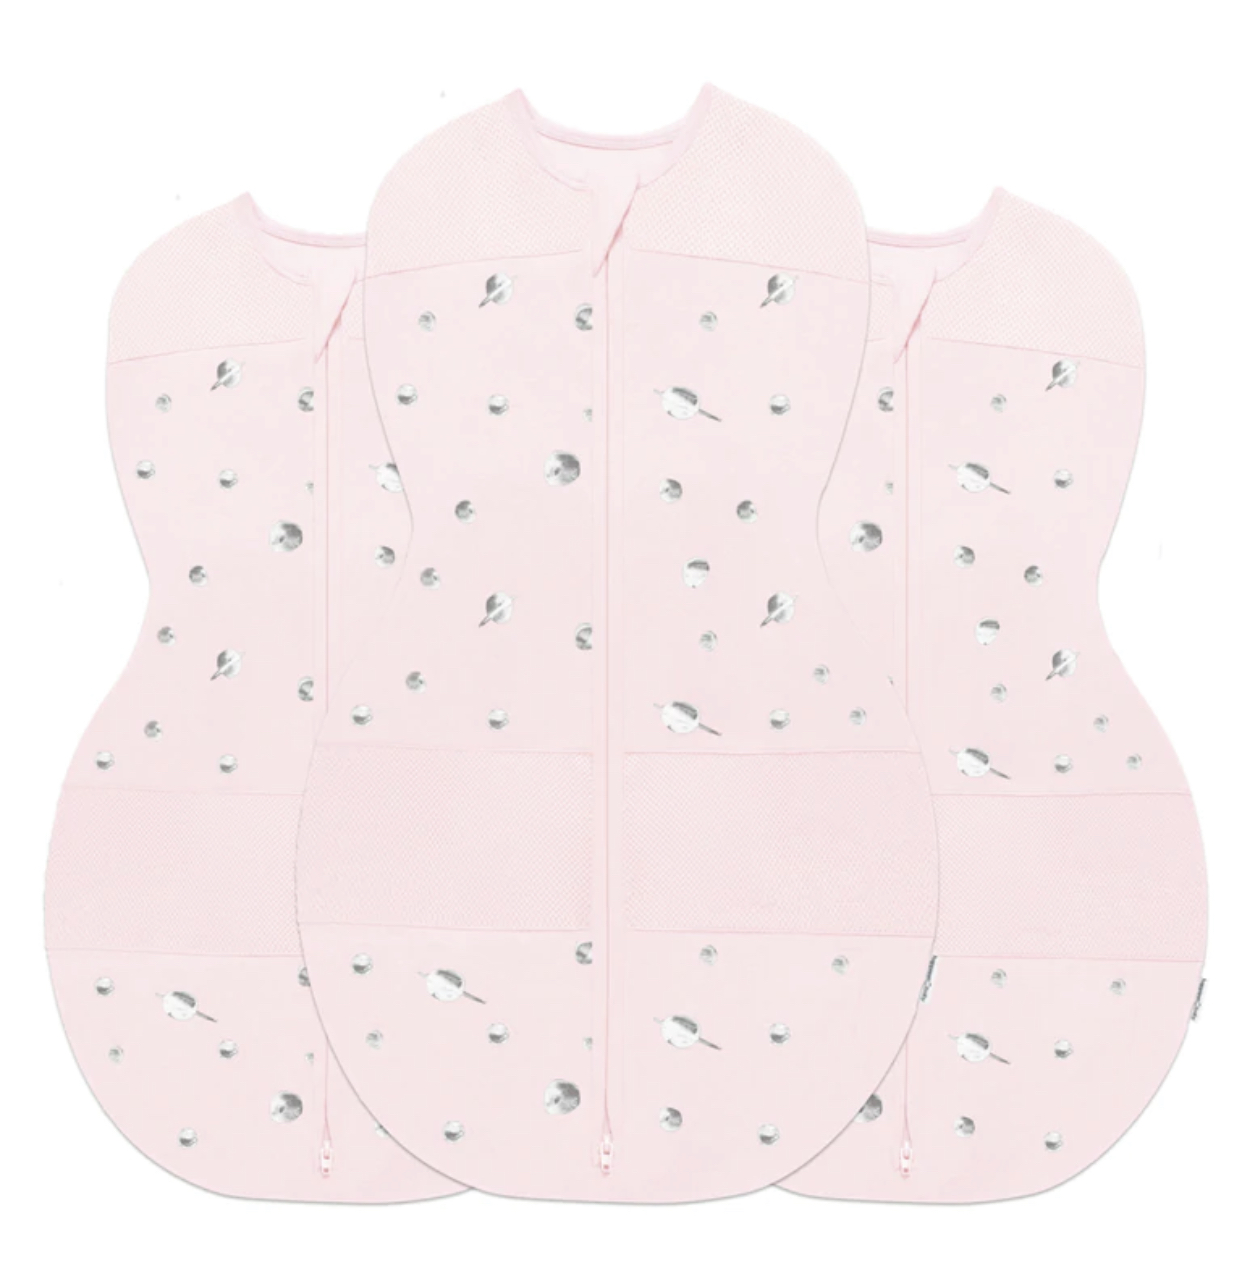 Snoo Swaddles 3 Pack